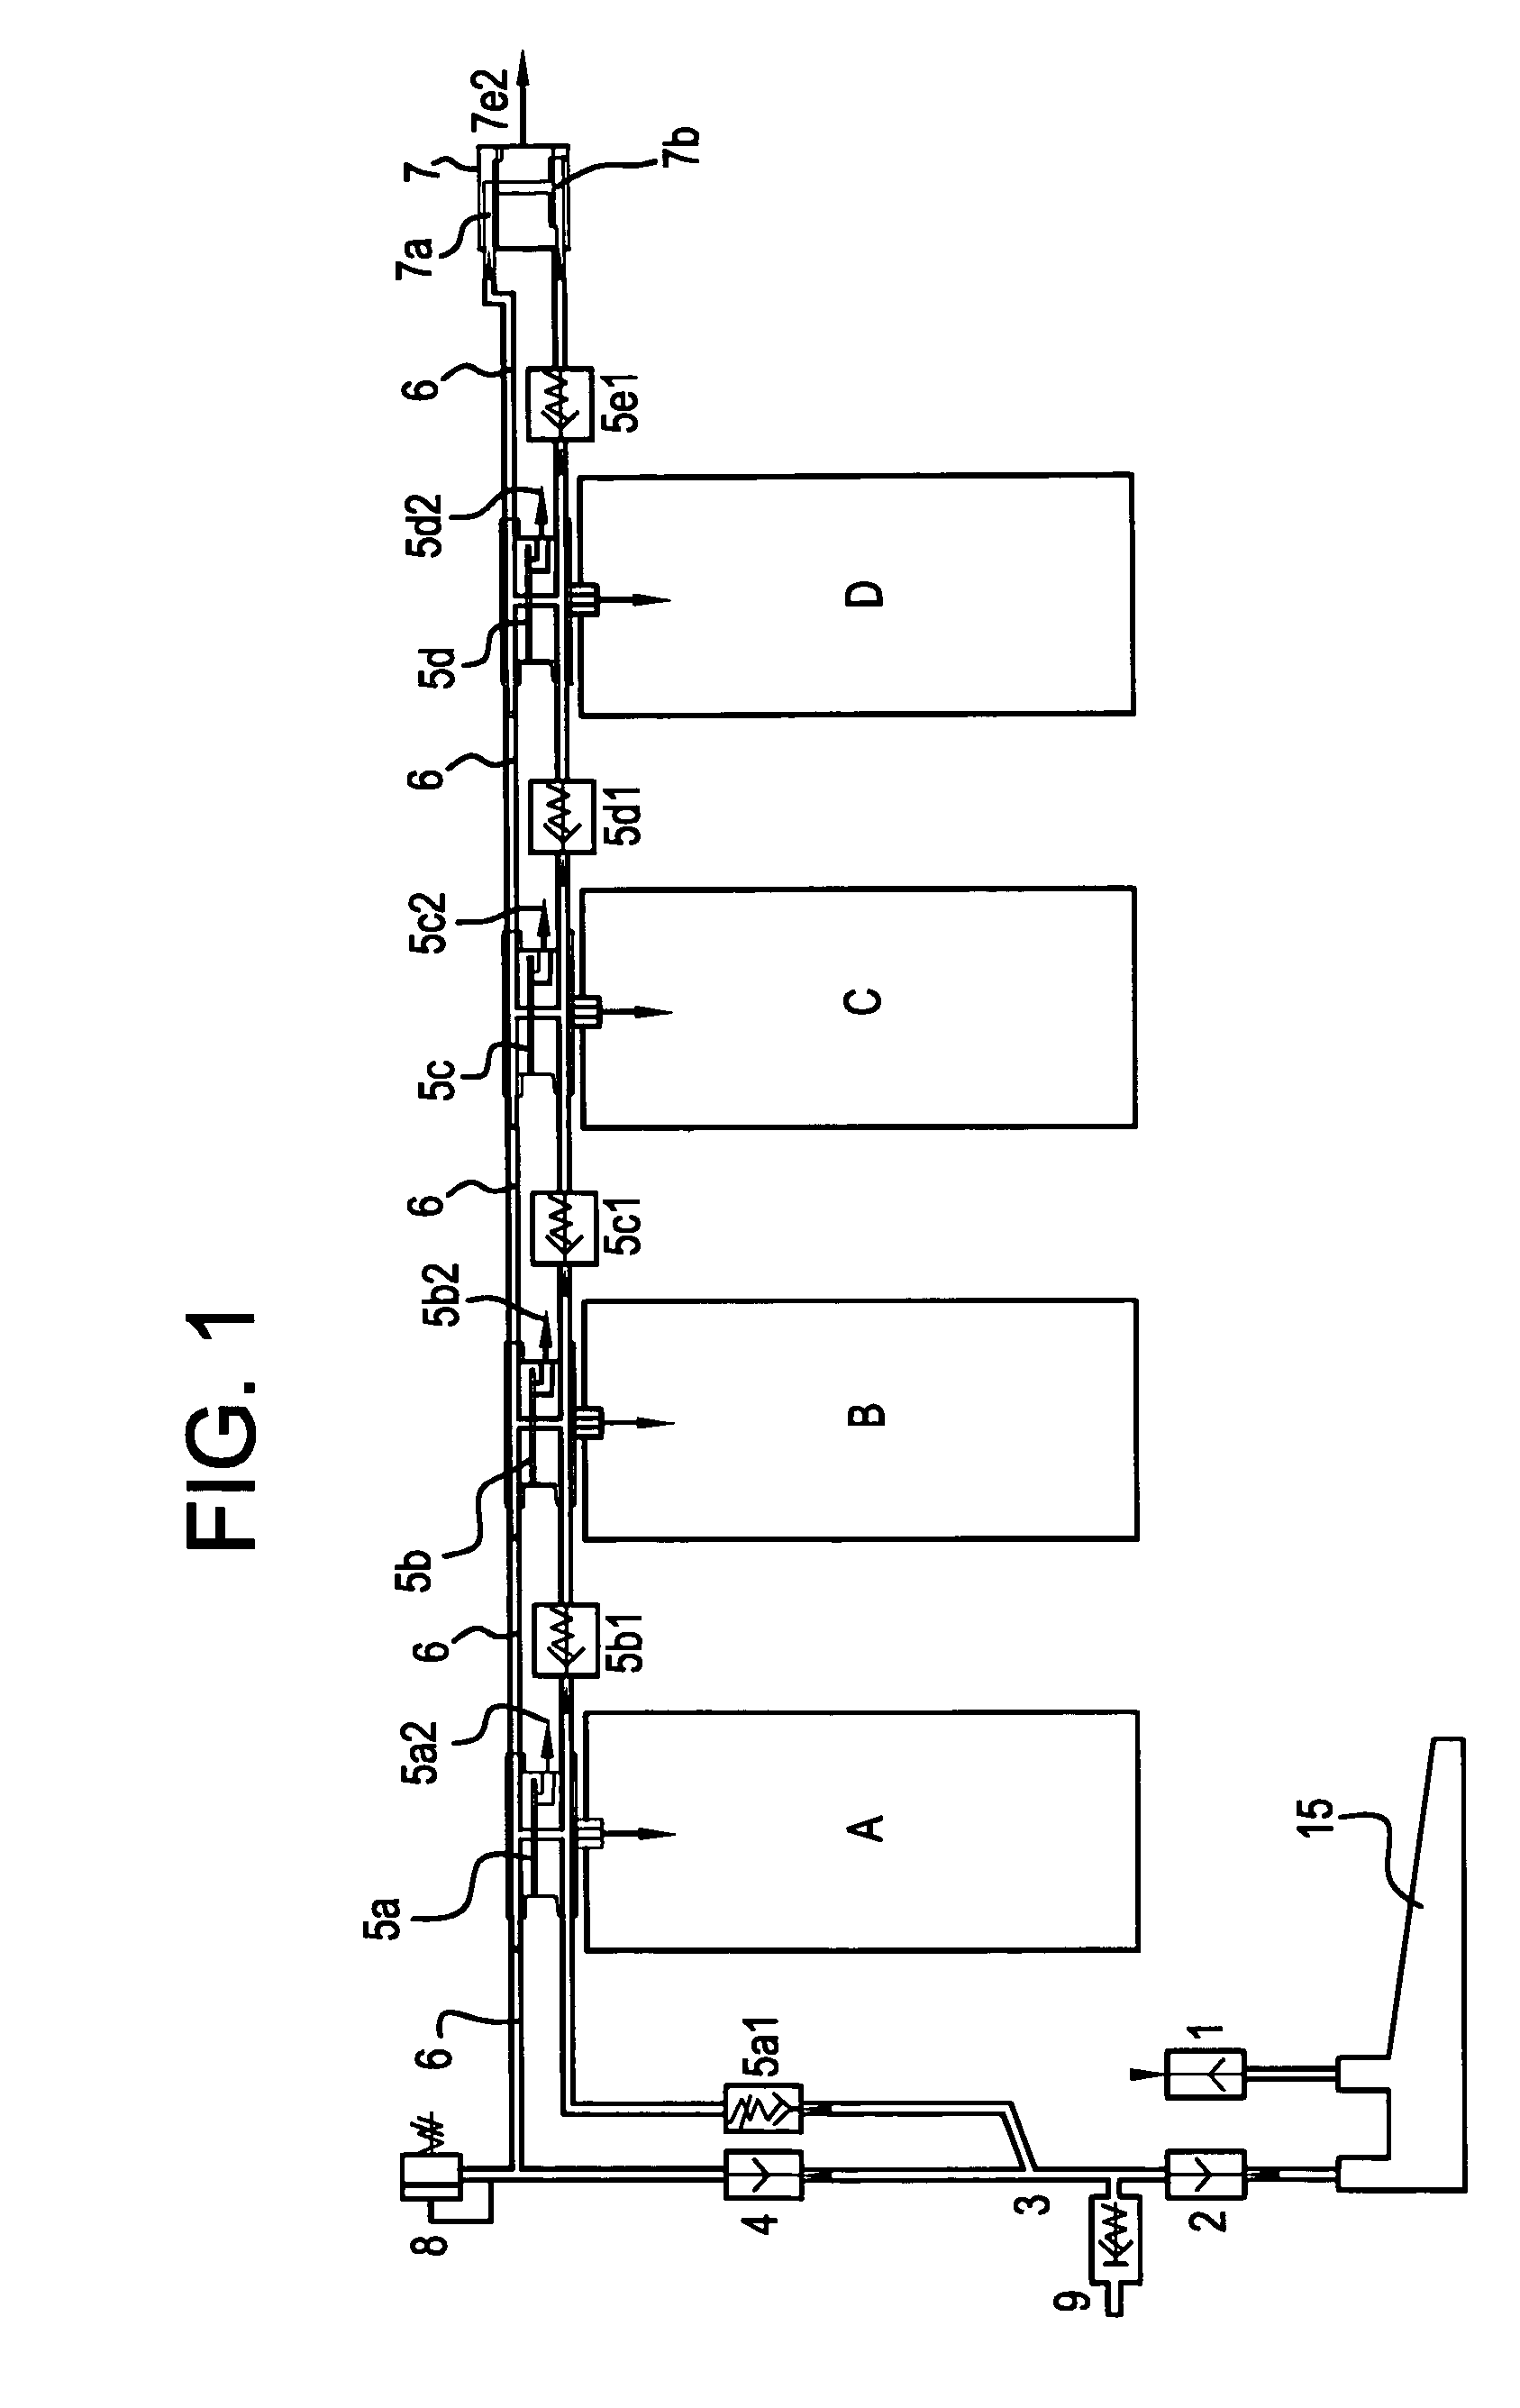 Device and method for low pressure compression and valve for use in the system